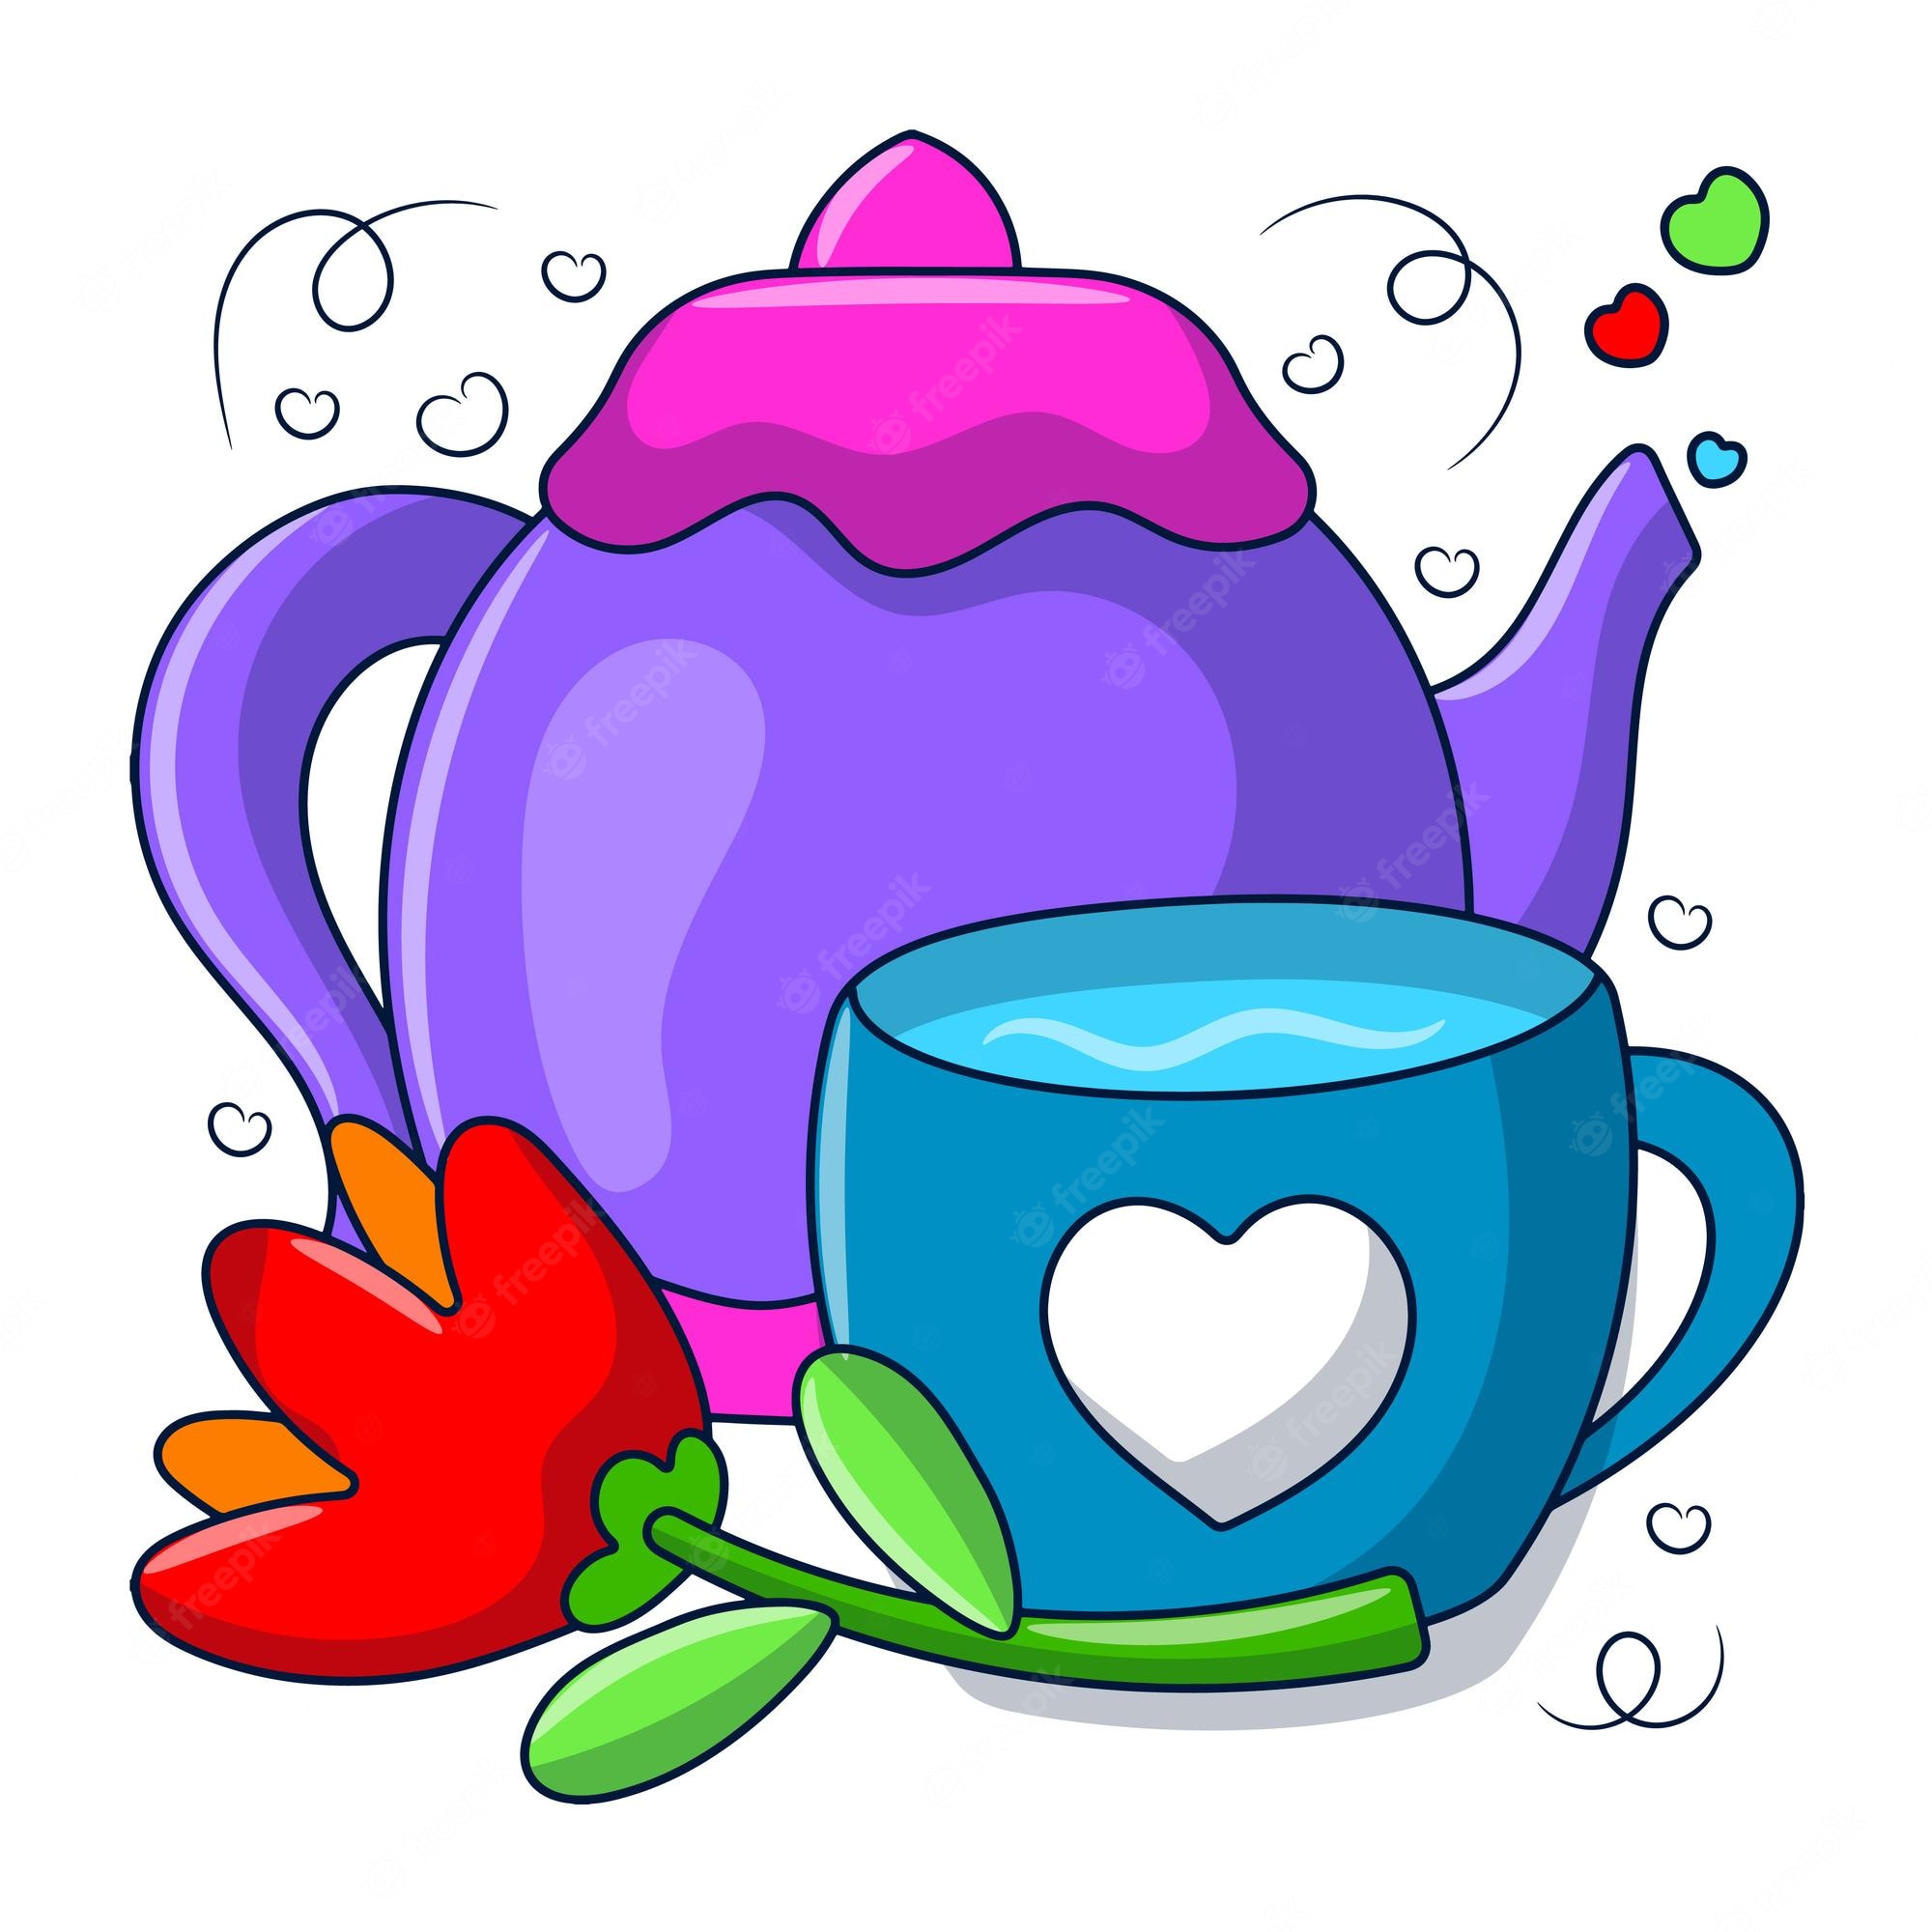 Coolest Teapot And Cup Clip Art Teapot And Cup Of Tea - Cup Of Tea ...